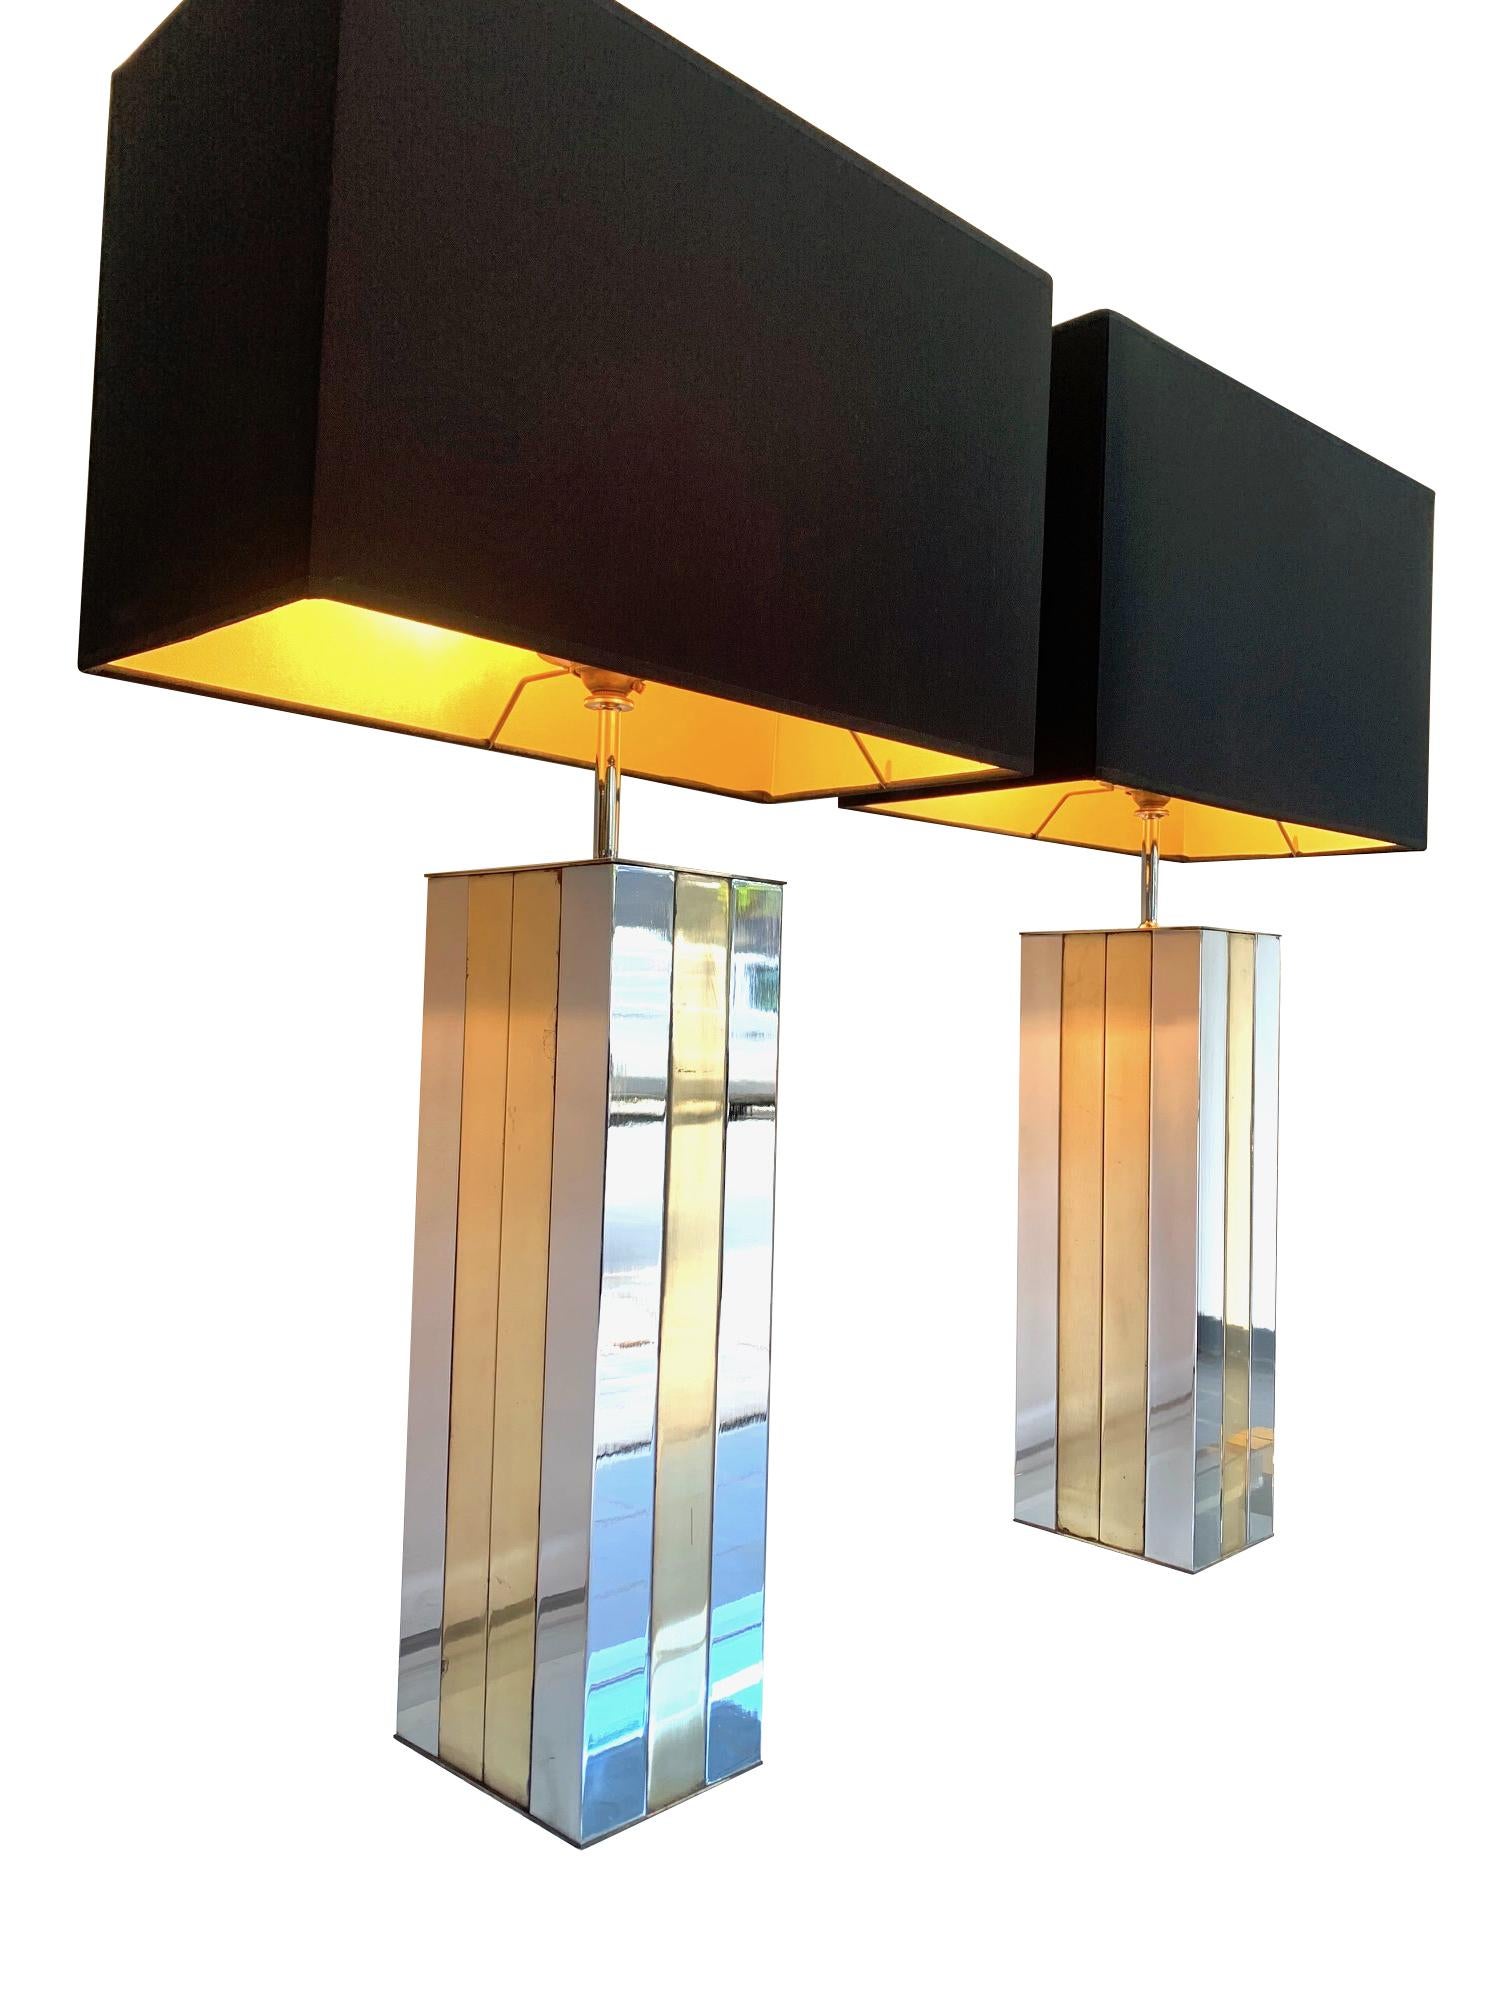 A pair of large 1970s Willy Rizzo brass and chrome lamps with single fitting with new bespoke black shades with gold linings. Re wired with new fittings, antique gold cord flex and PAT tested.